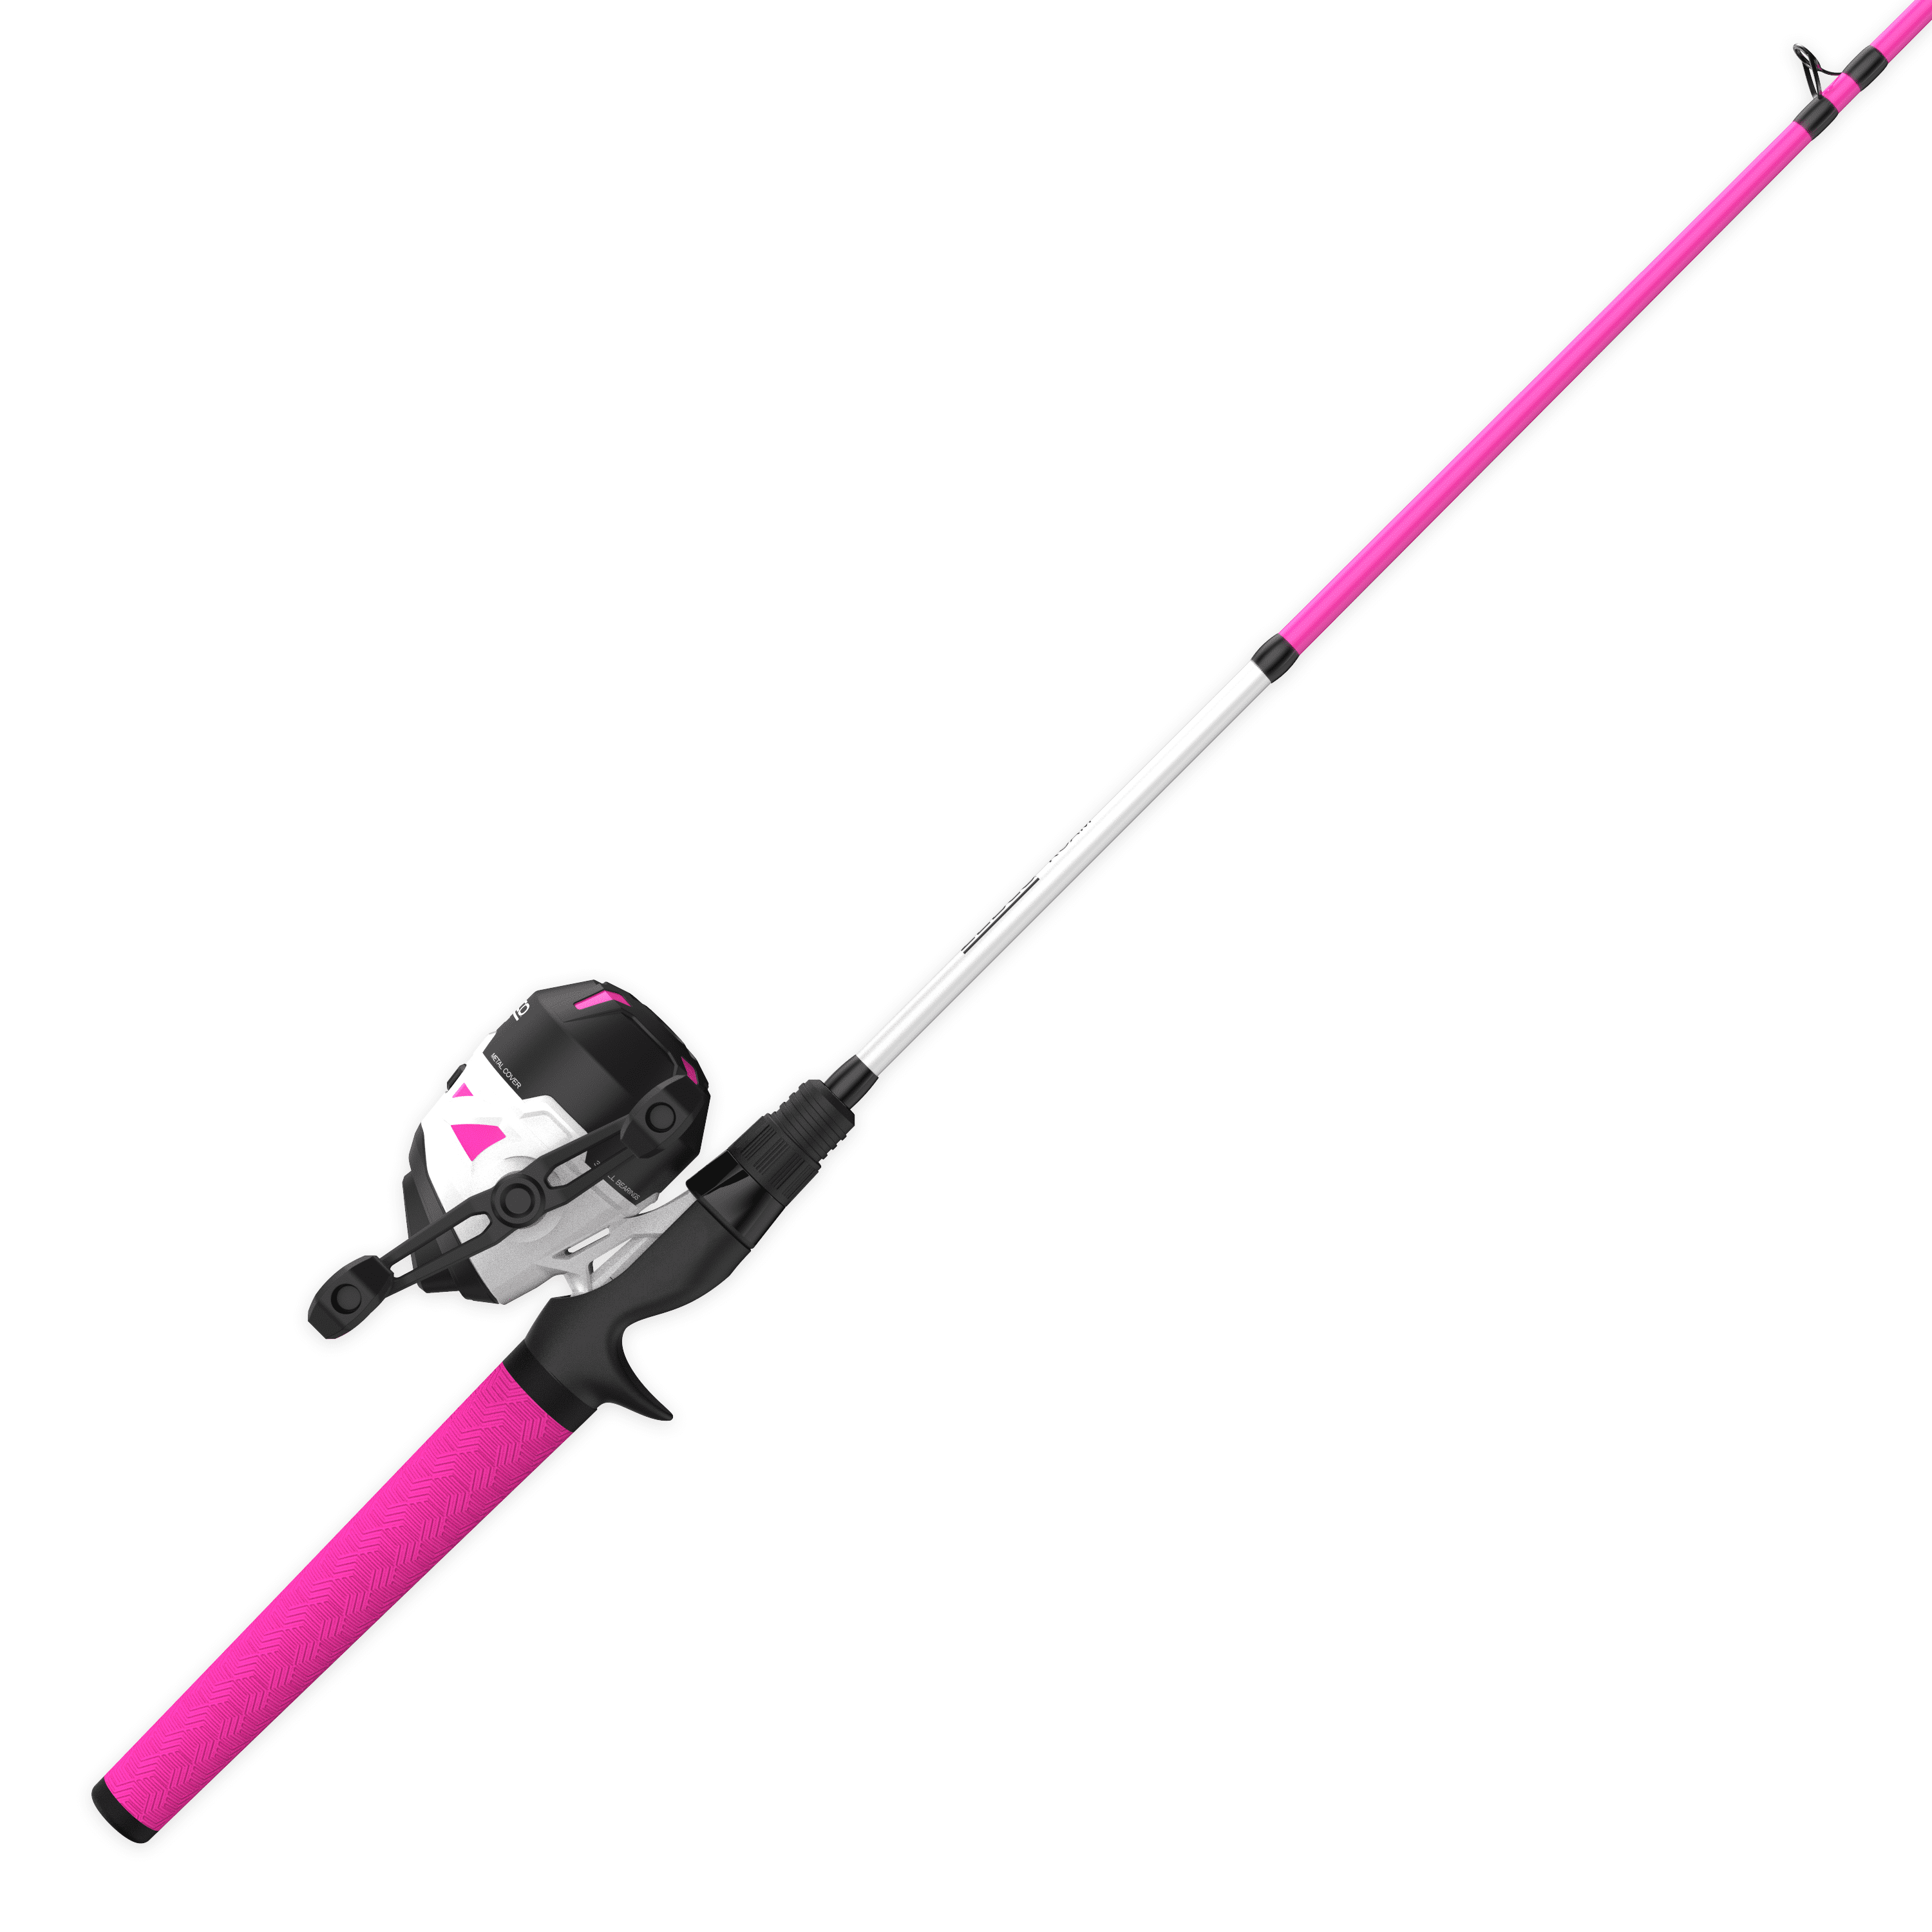 Zebco Roam Spinning Reel and Fishing Rod Combo, 6-Foot 2-Piece